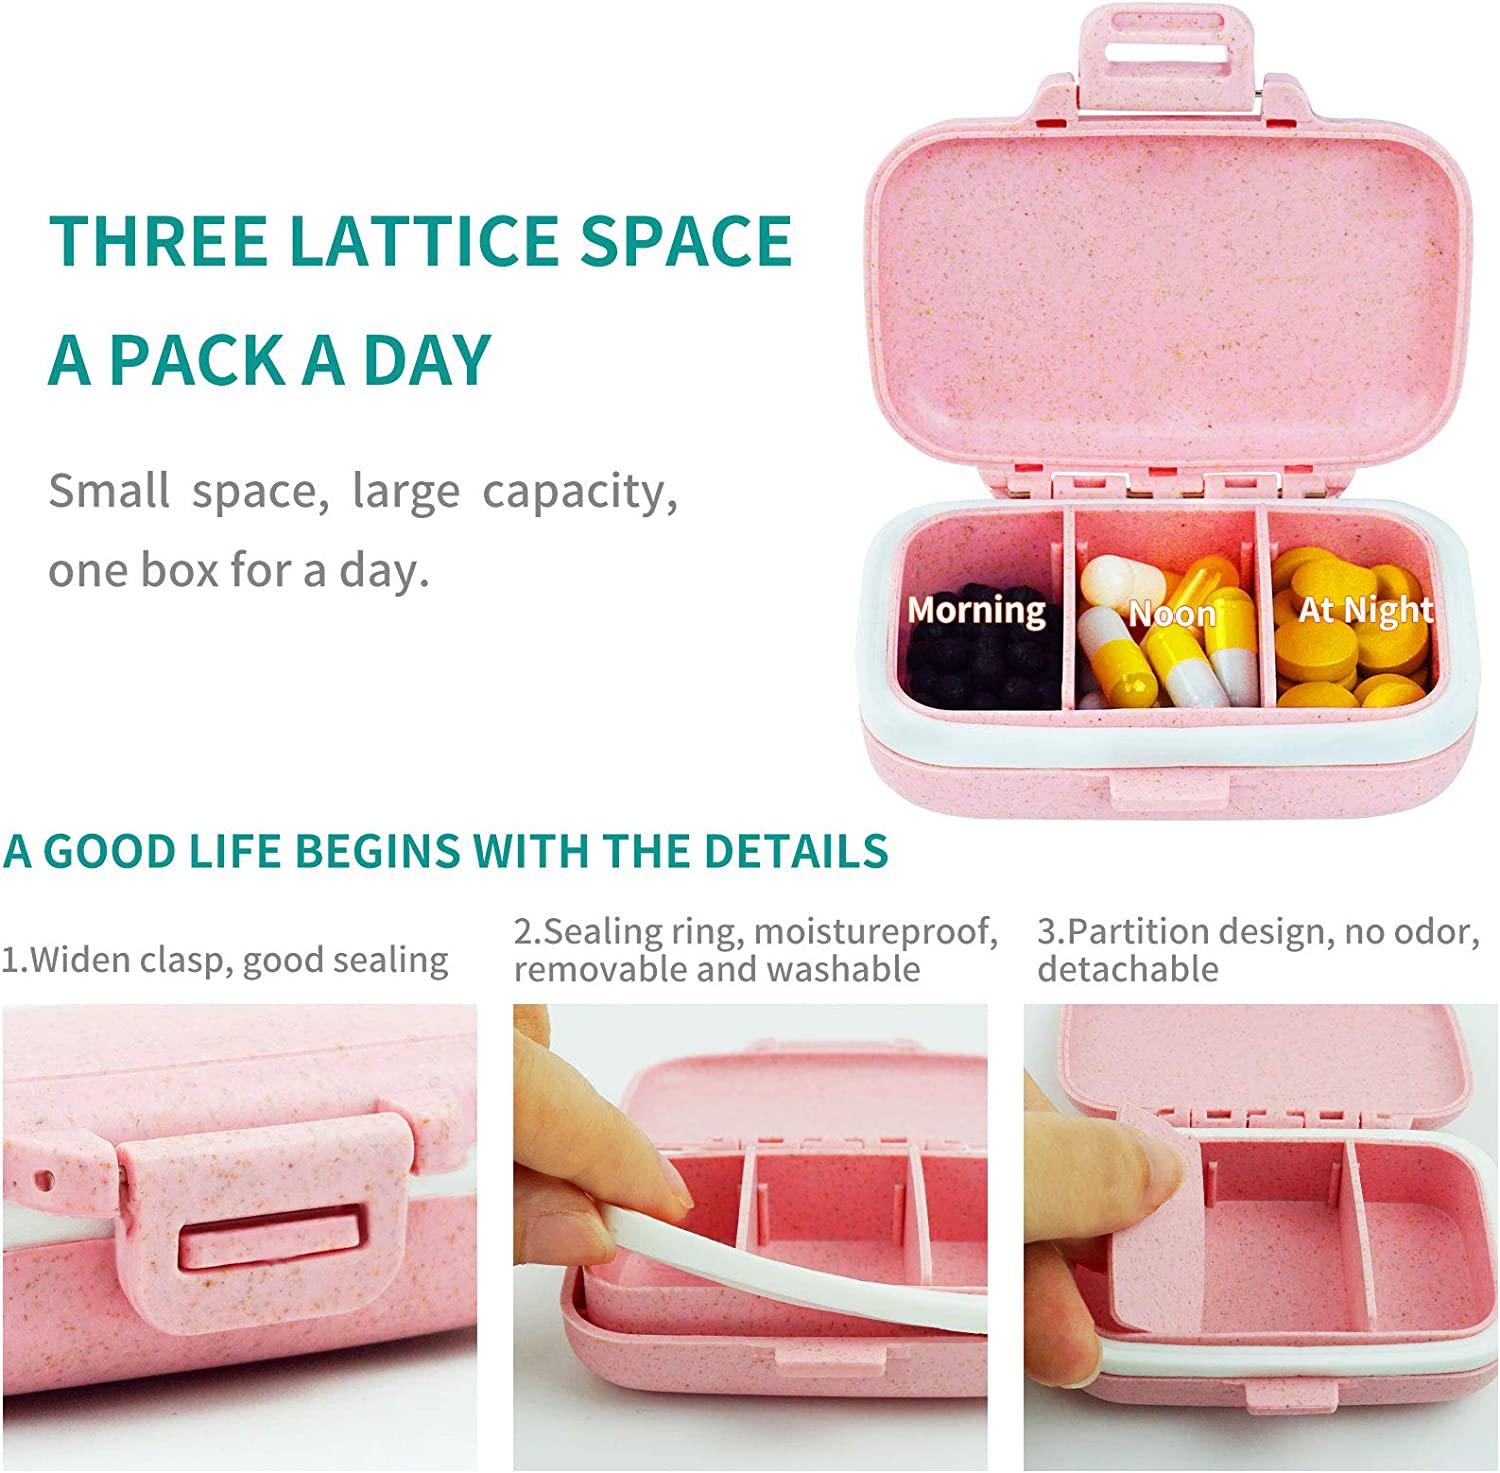 PILL HOLDER TABLETS 2 COMPARTMENTS DAILY PILLS SIZE PILLS Medicine